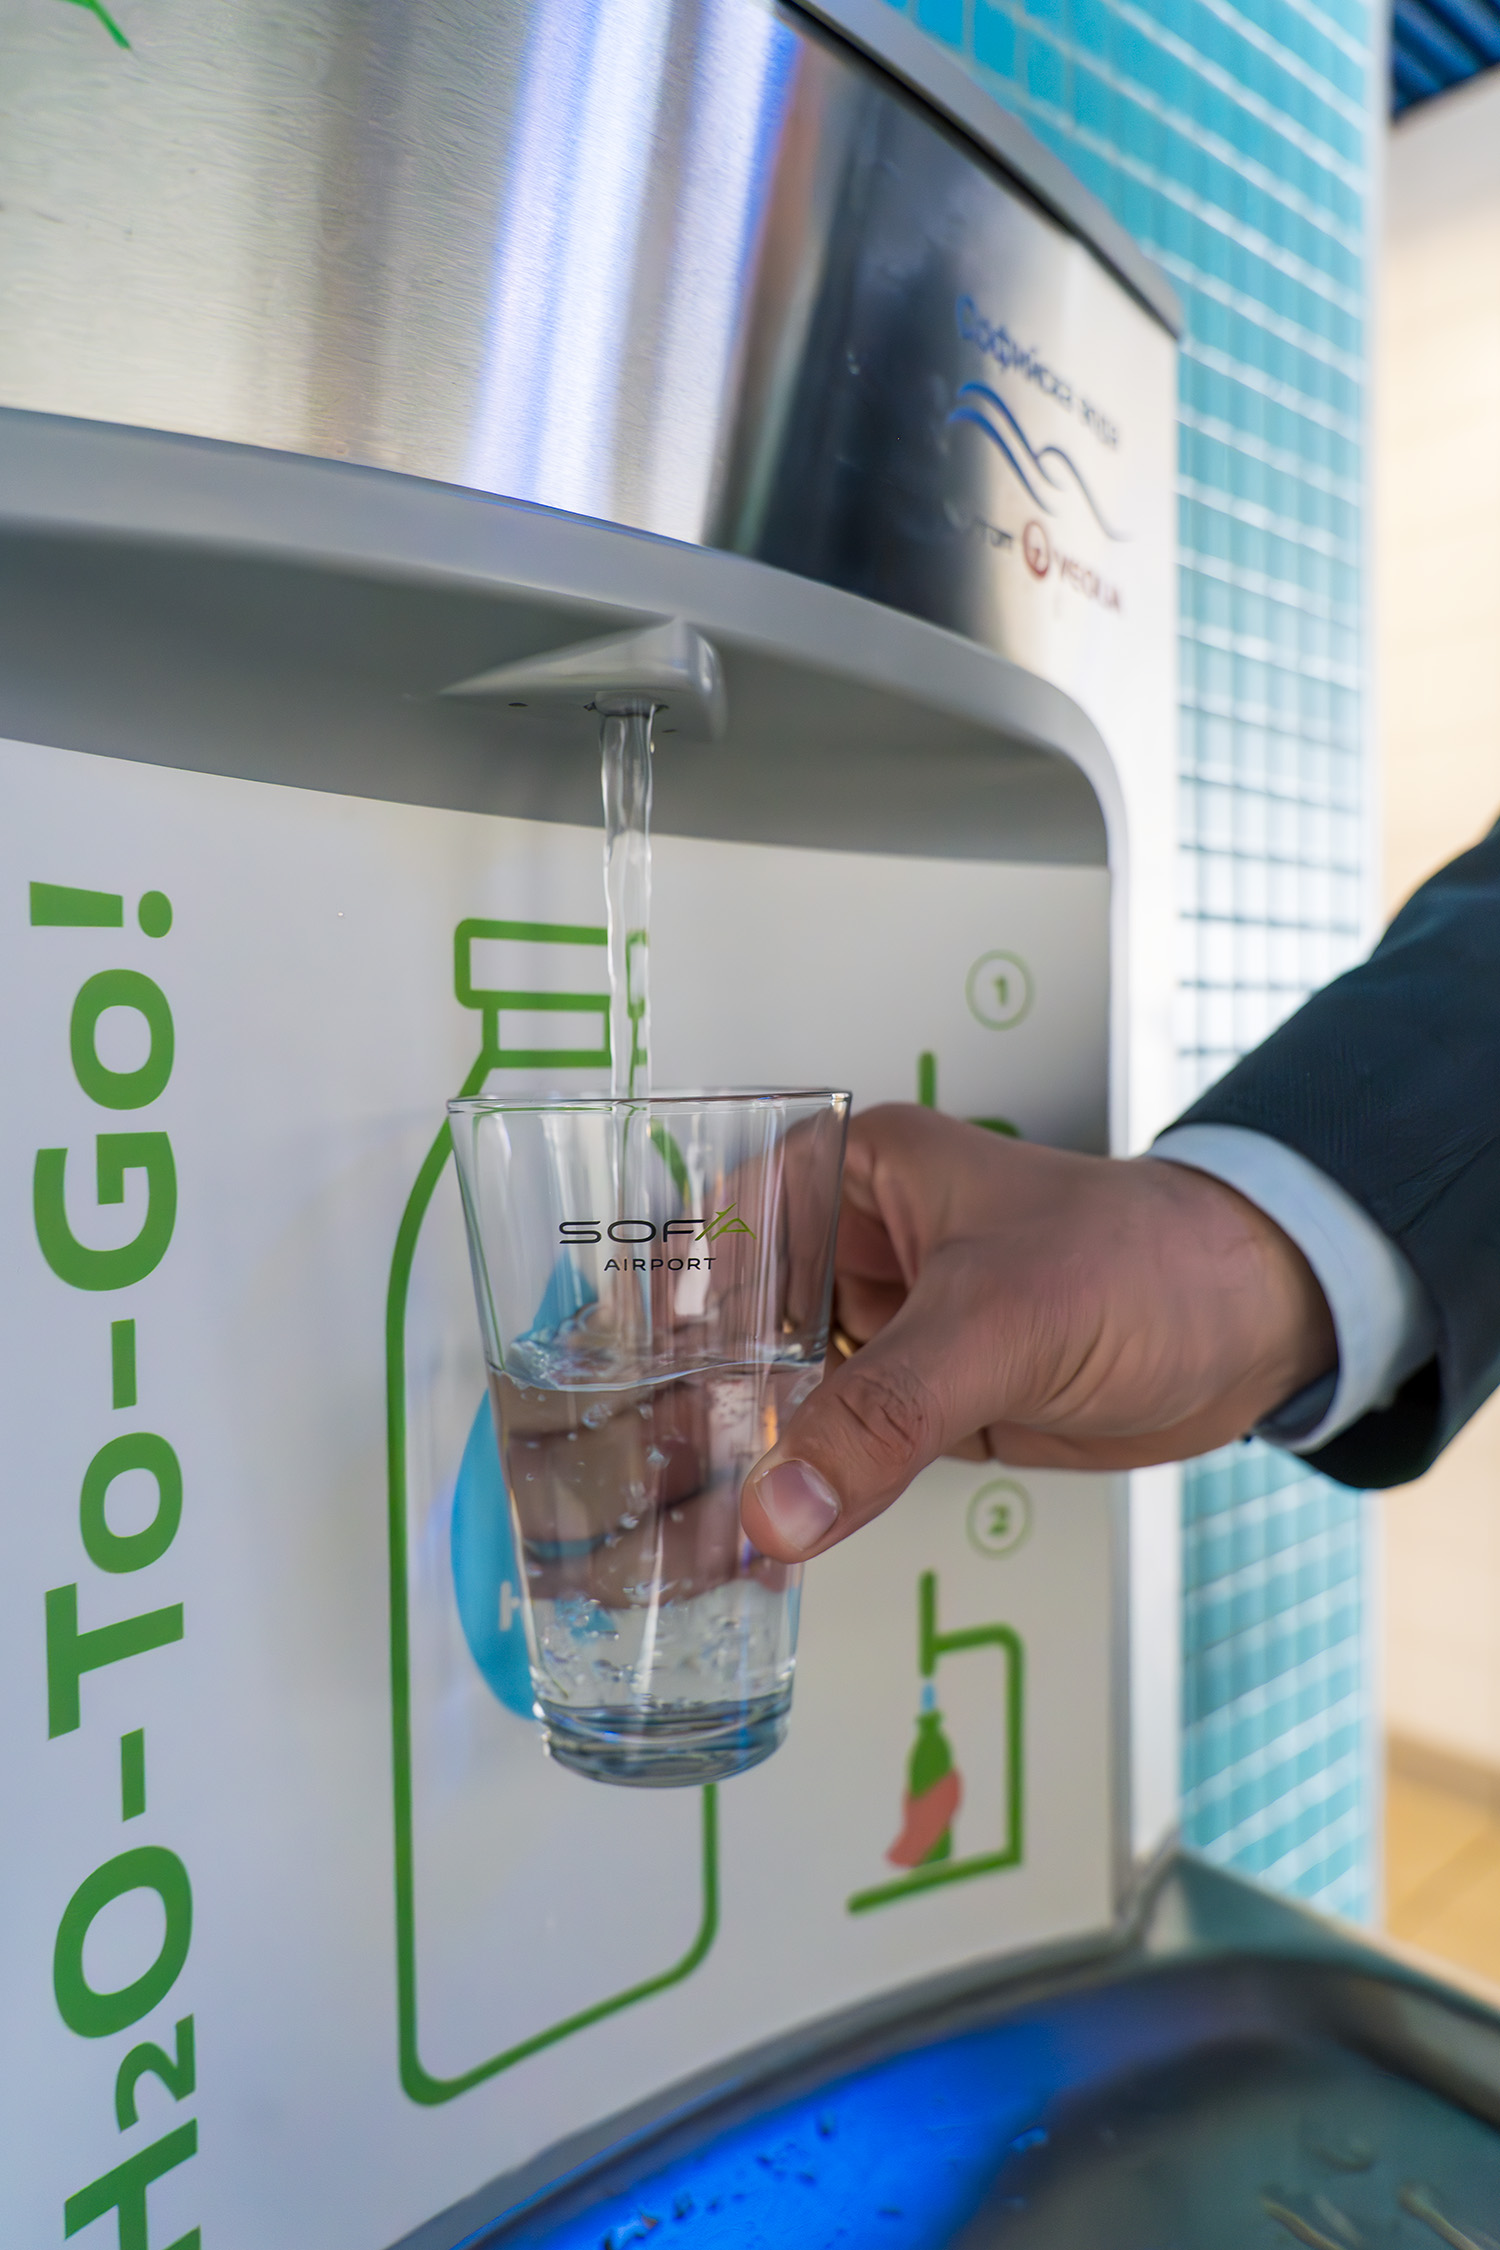 Sofia Airport passengers already fill their bottles with water from smart water fountains